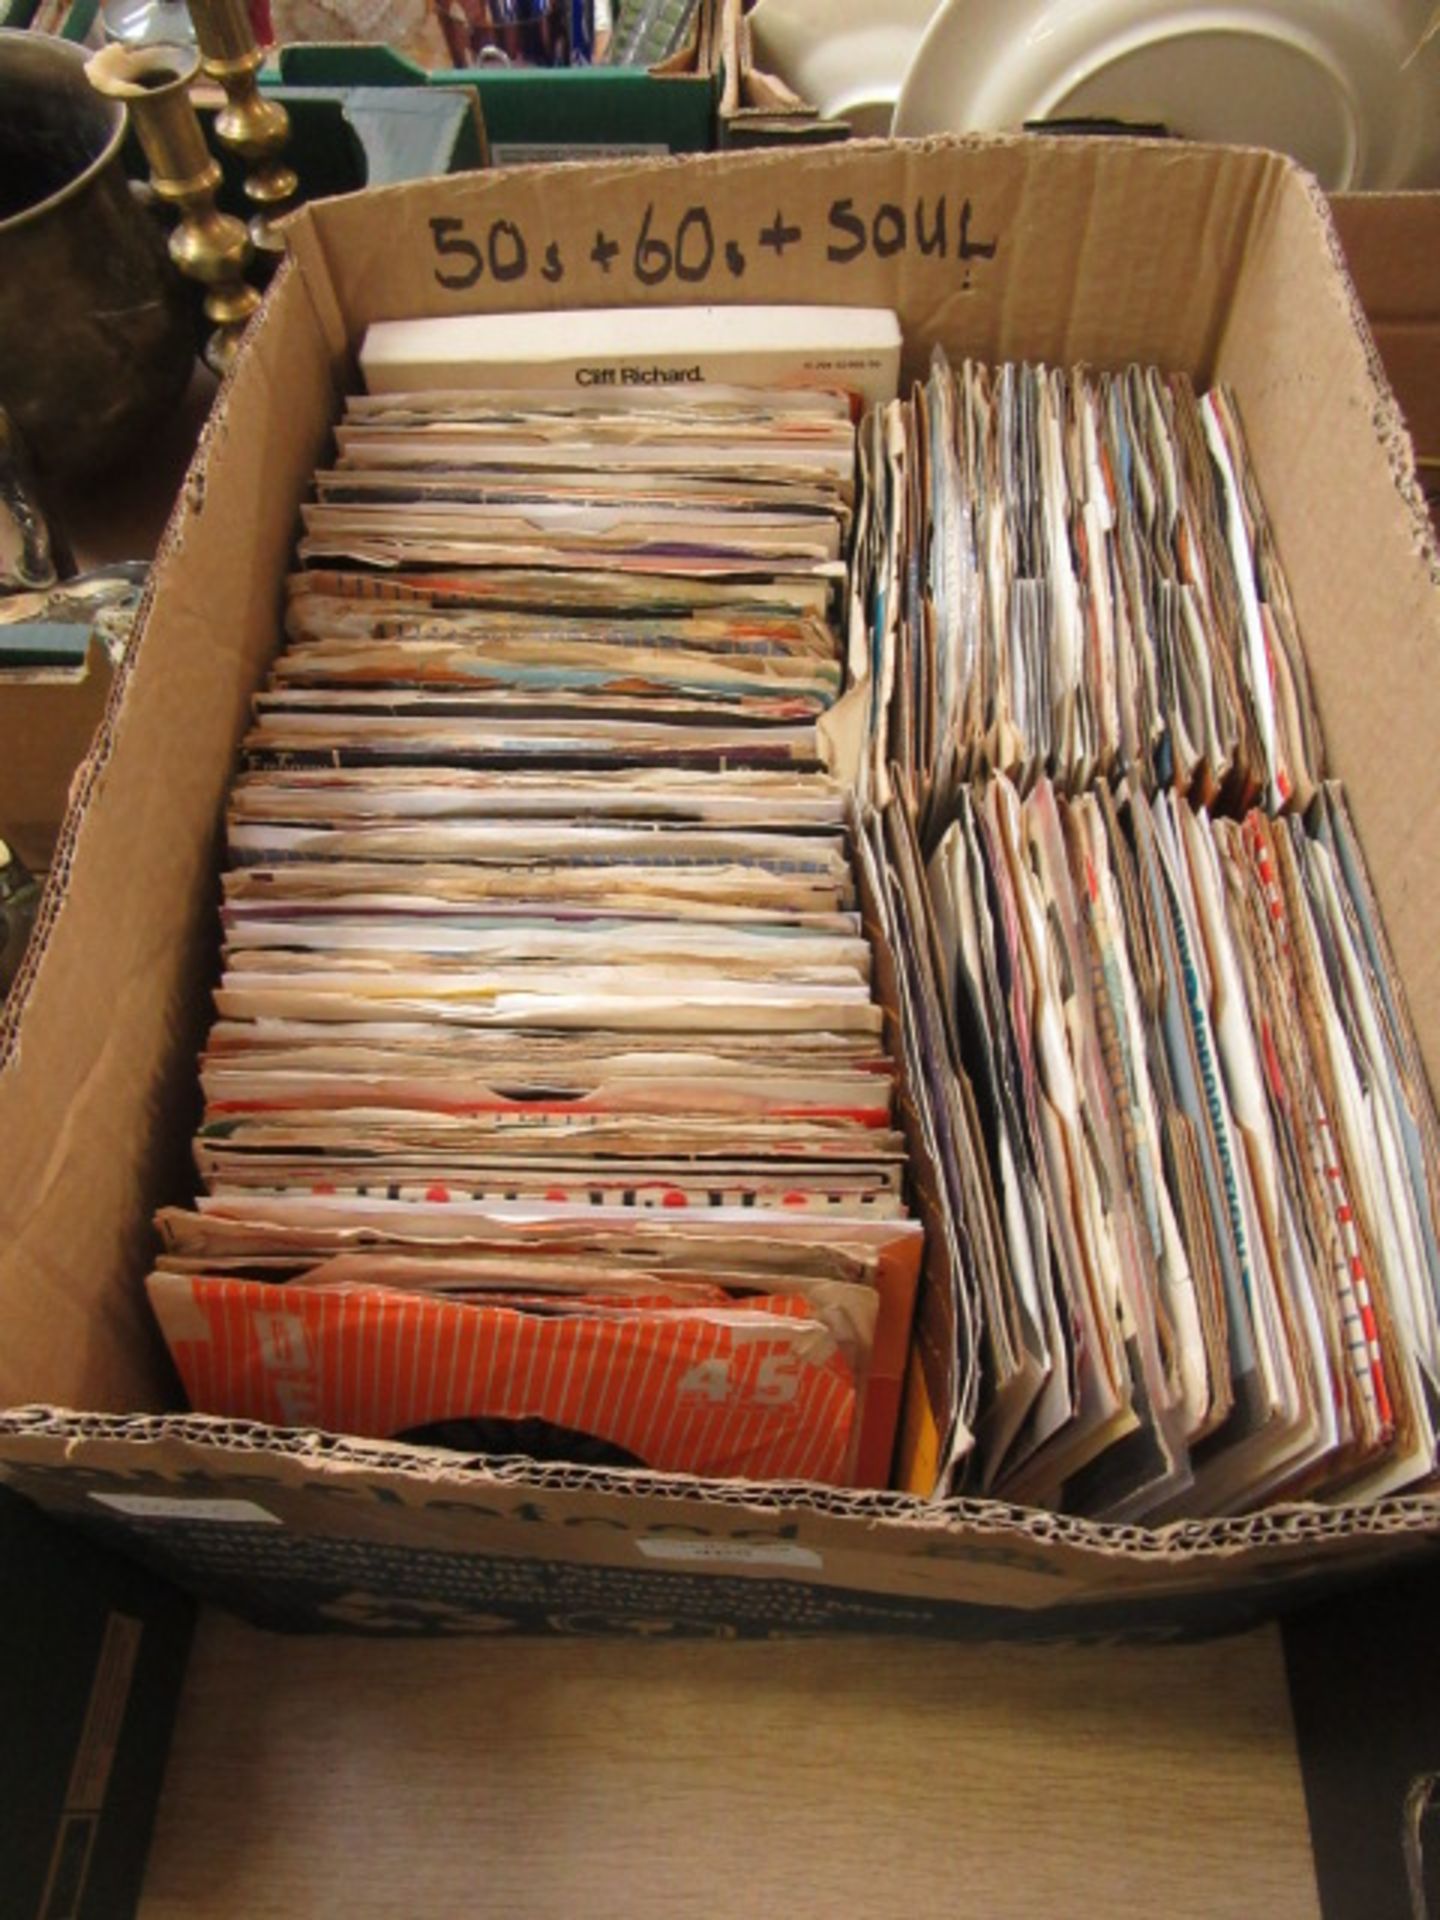 A box containing an assortment of 45 RPM singles by various artists